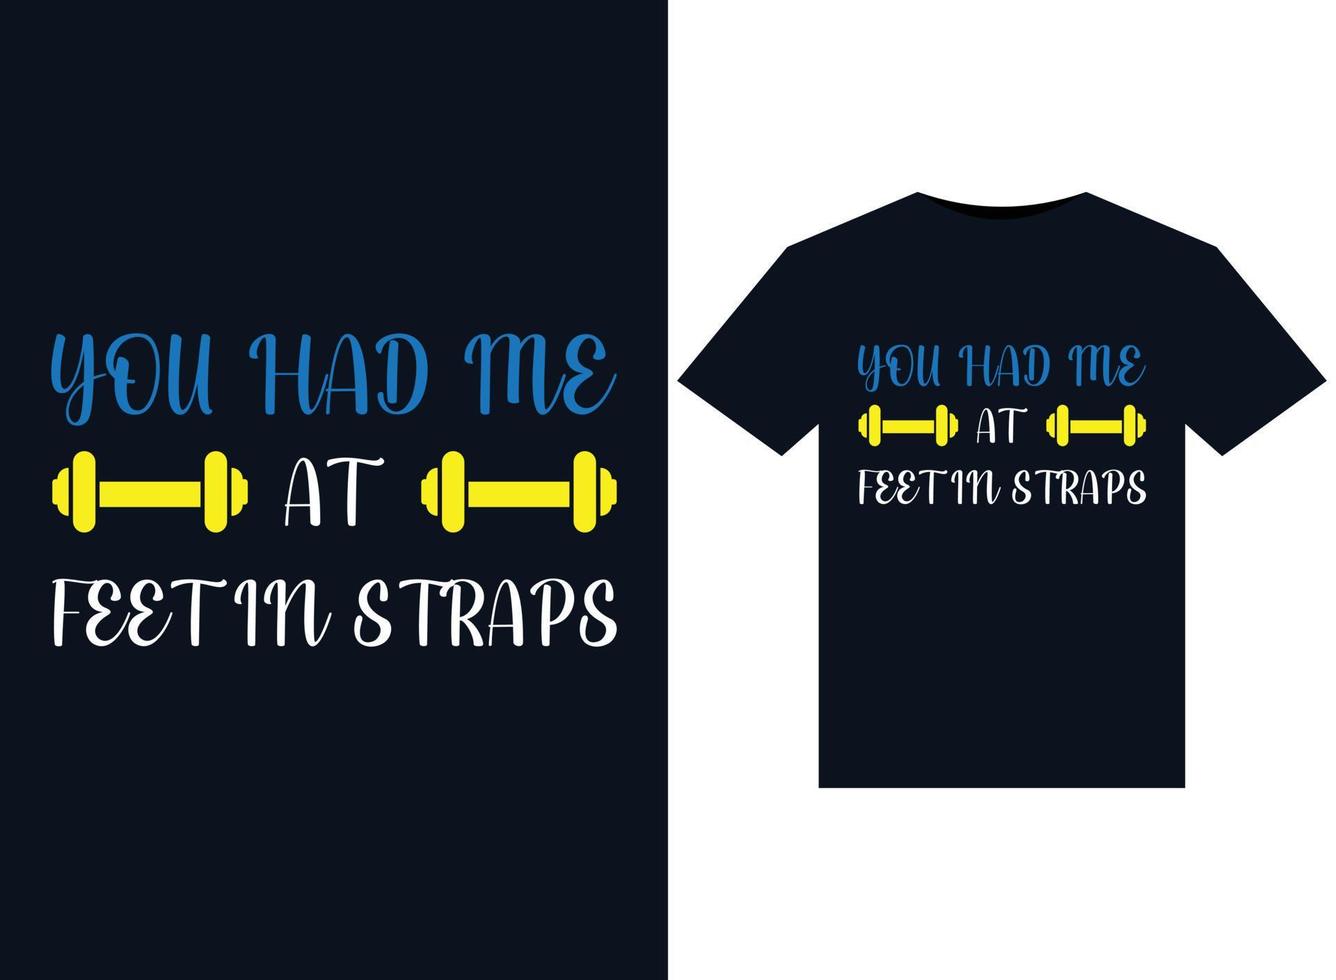 You had me at feet in straps. illustrations for print-ready T-Shirts design vector